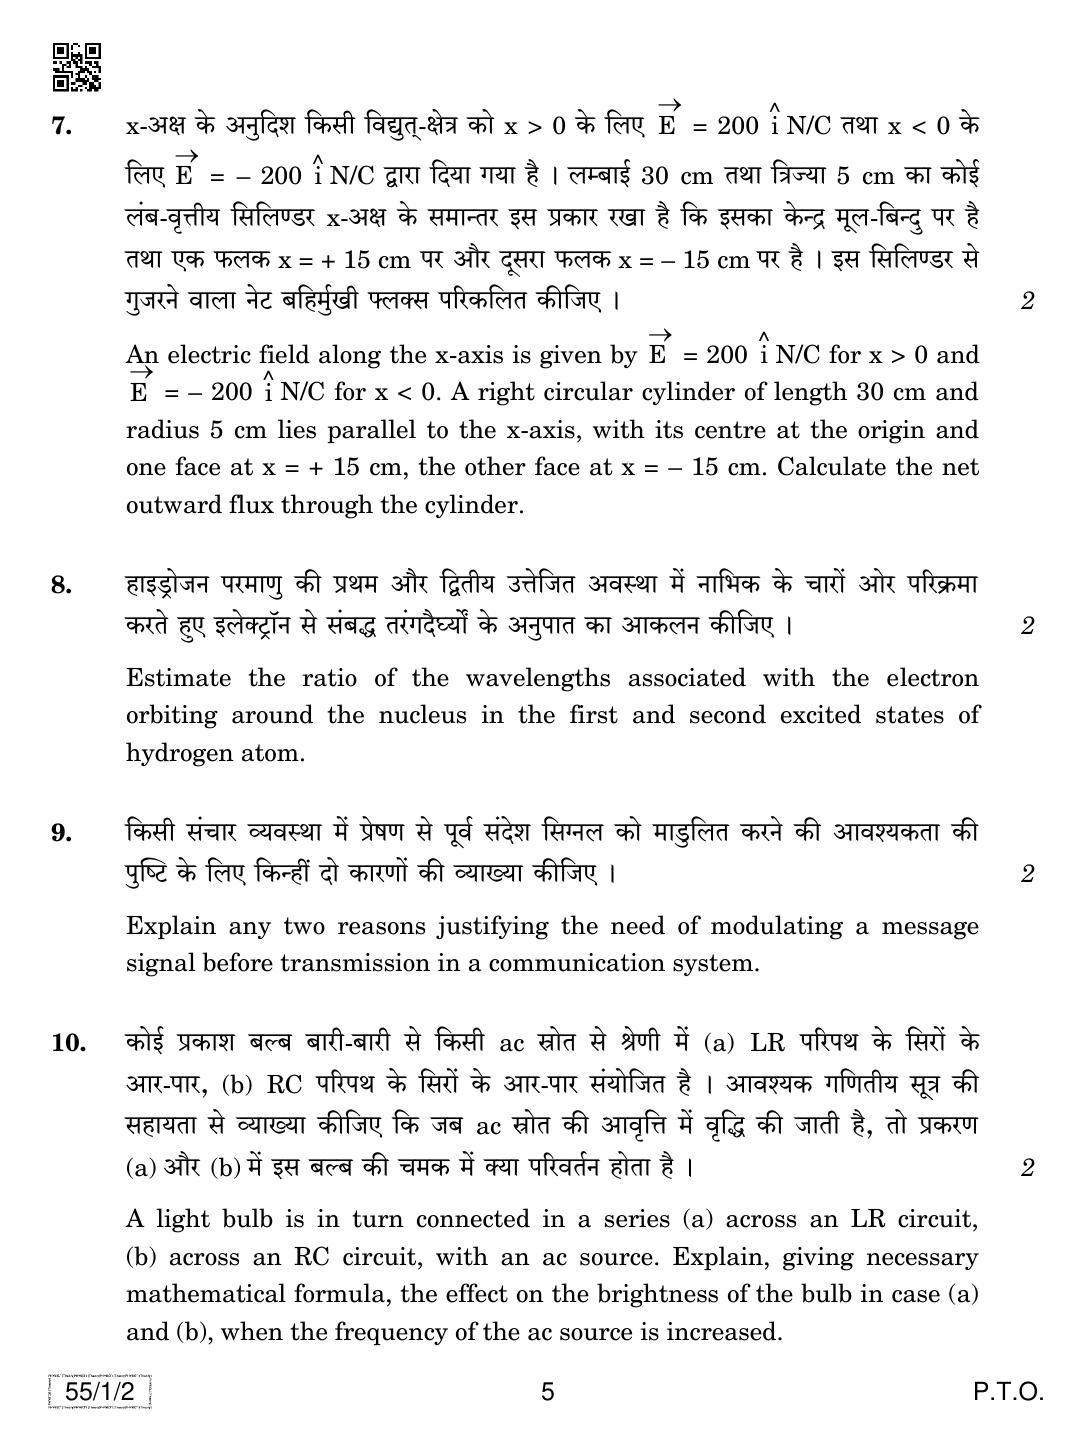 CBSE Class 12 55-1-2 PHYSICS 2019 Compartment Question Paper - Page 5